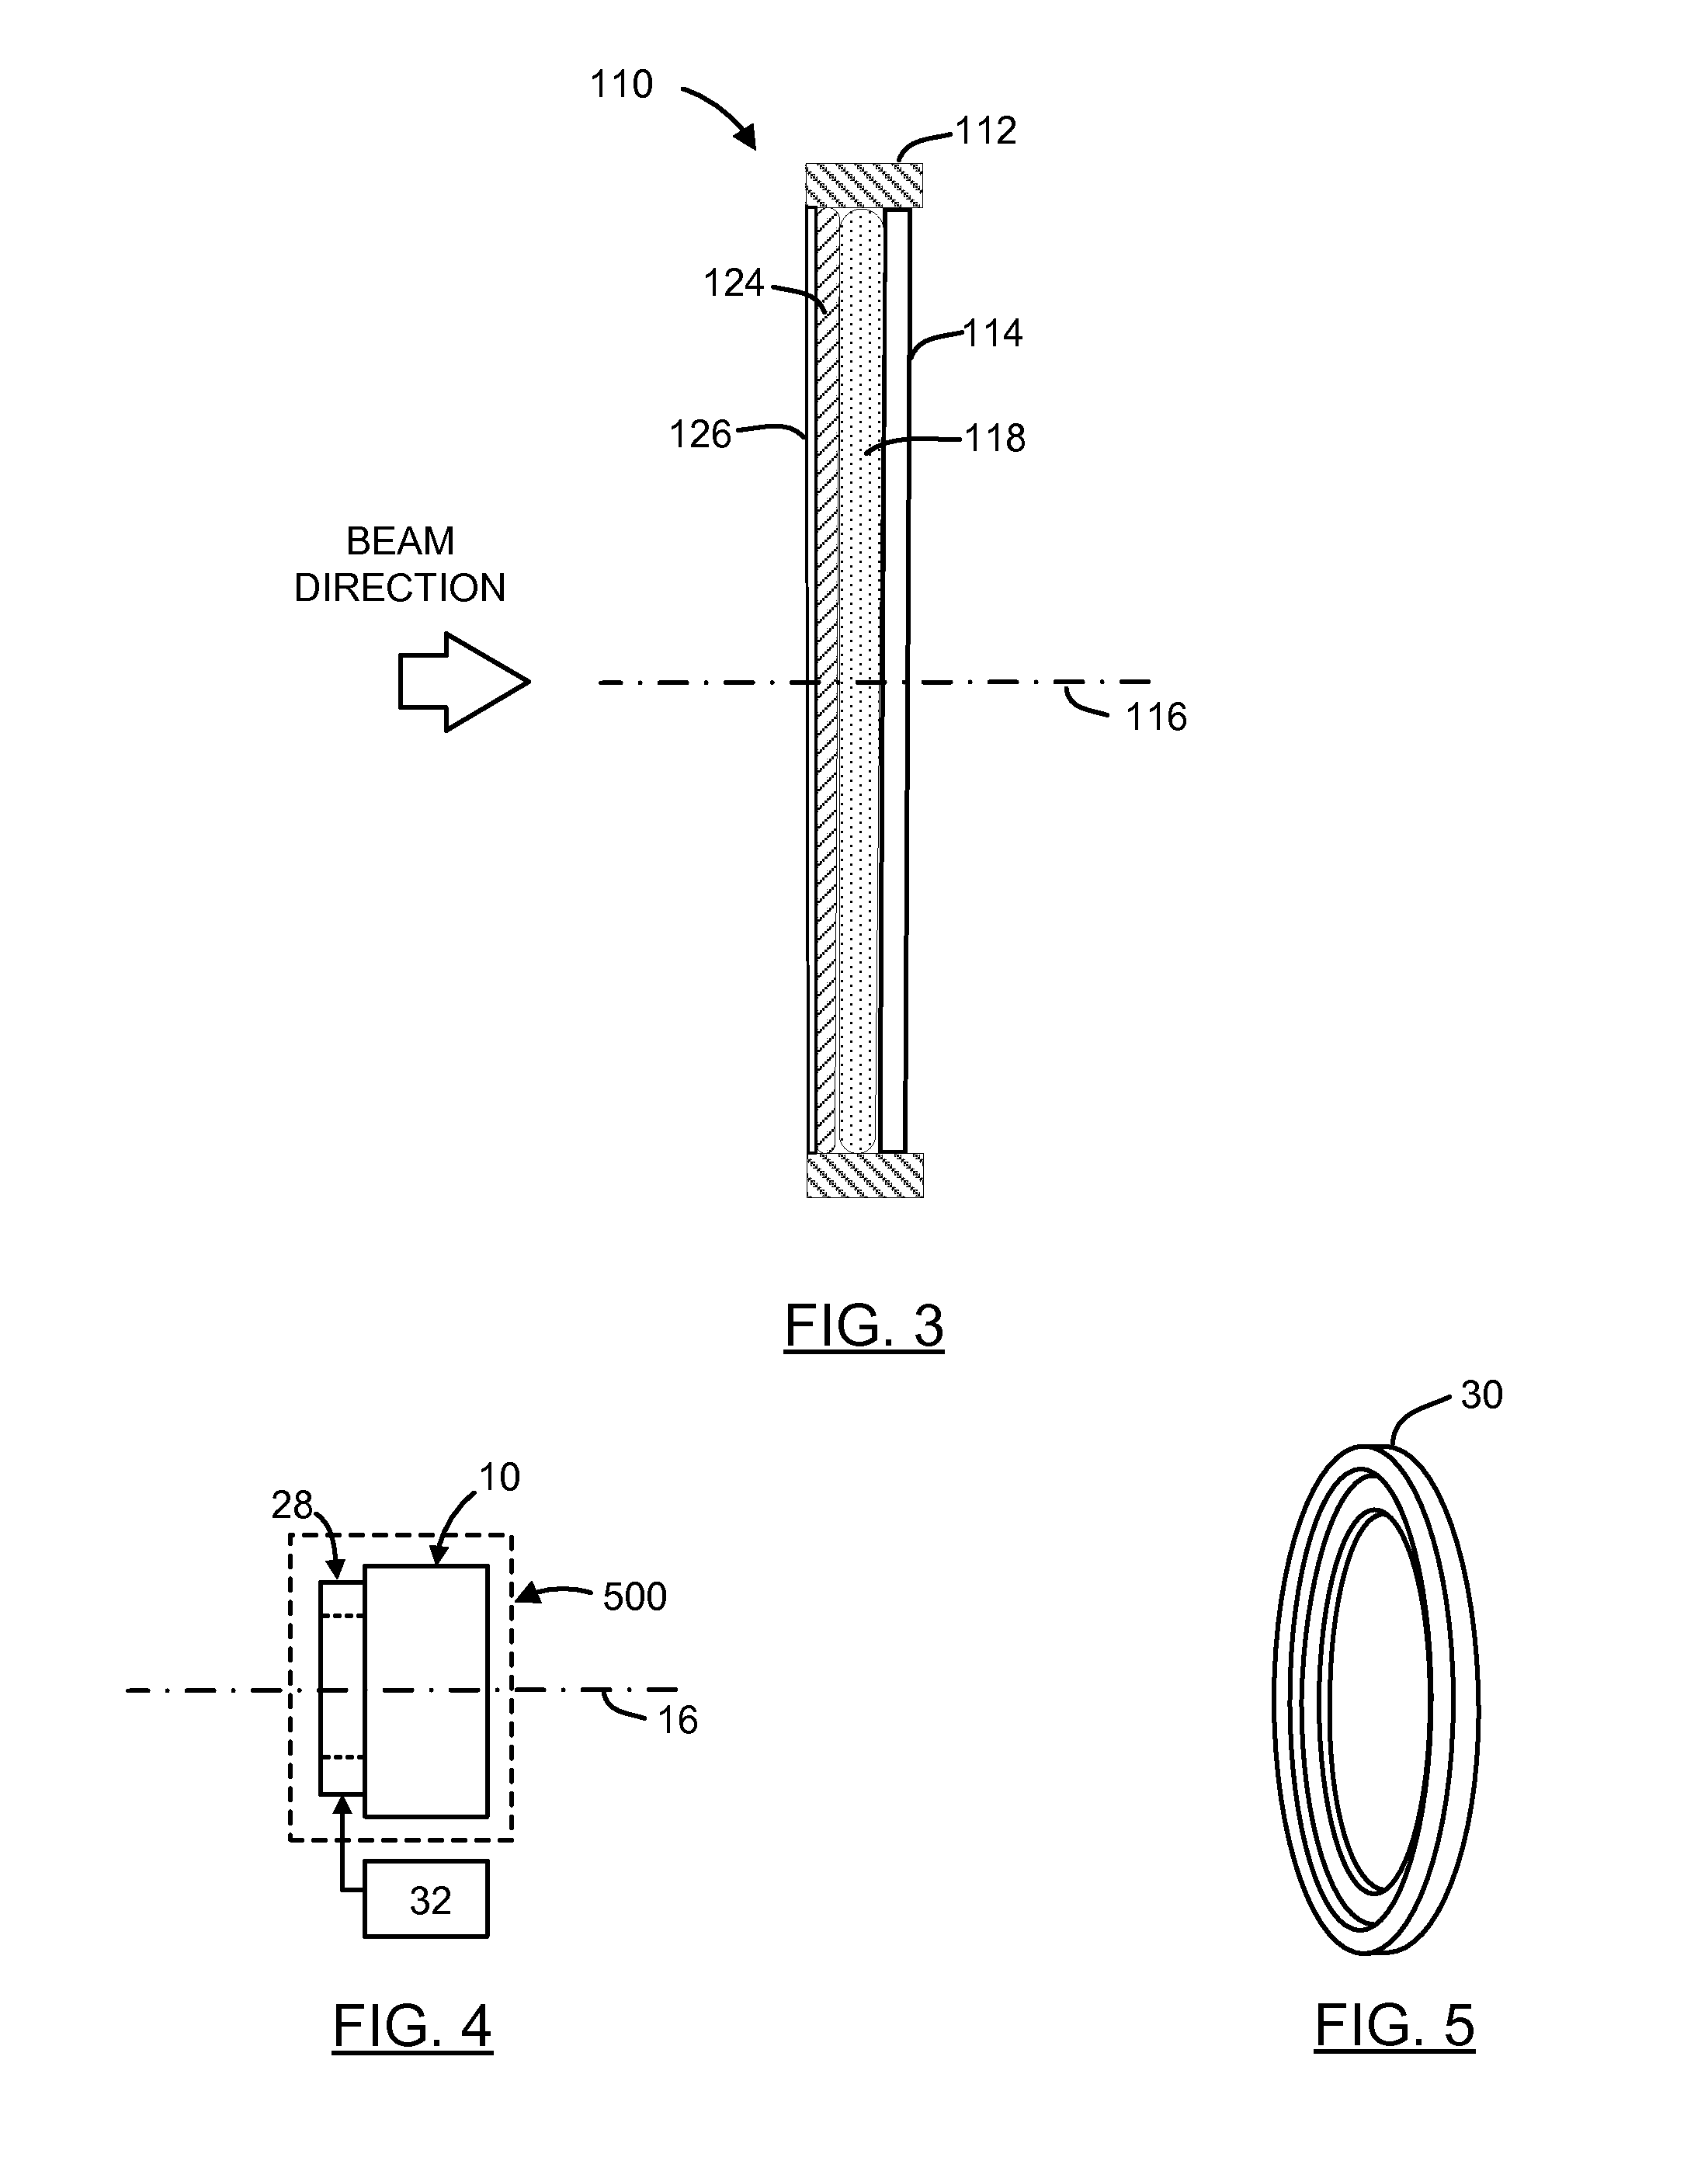 Solid elastic lens element and method of making same